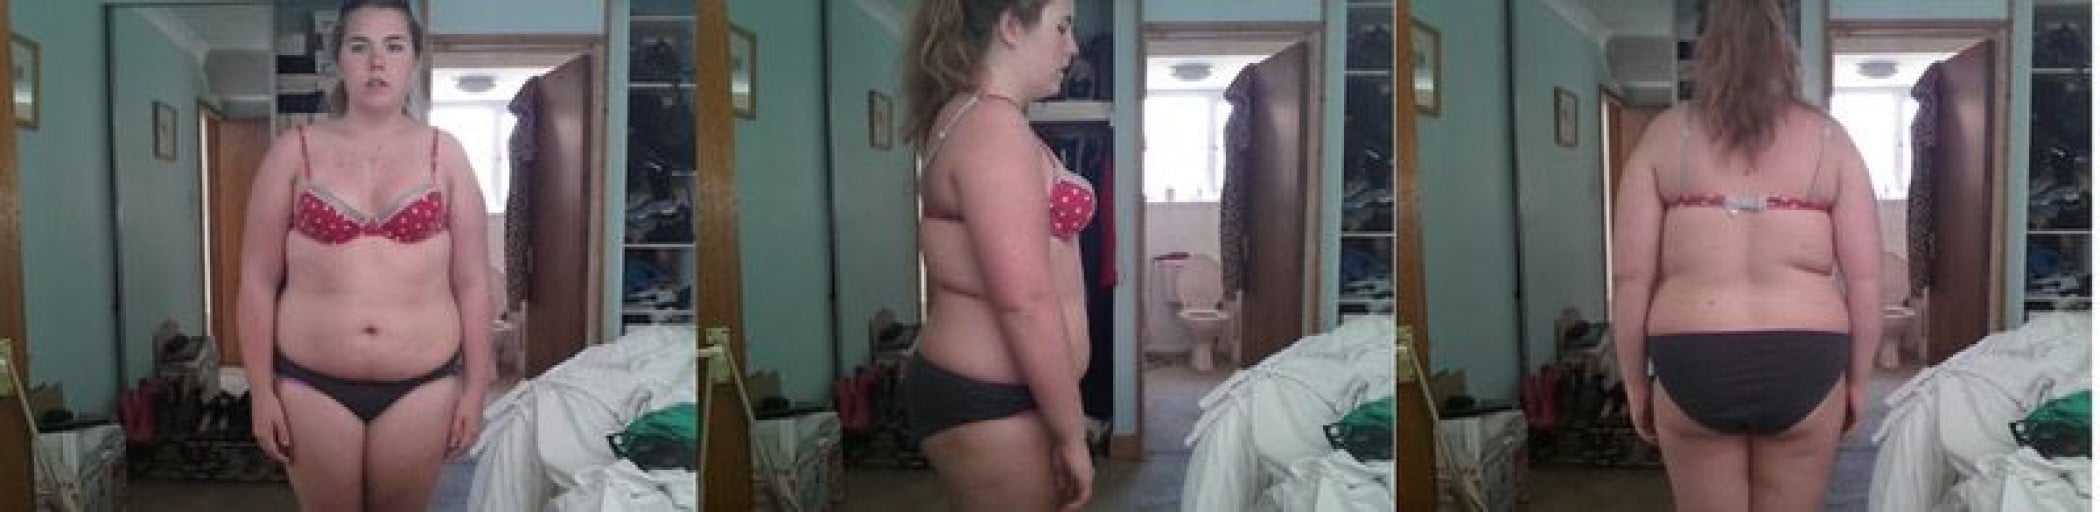 A picture of a 5'8" female showing a fat loss from 220 pounds to 183 pounds. A respectable loss of 37 pounds.